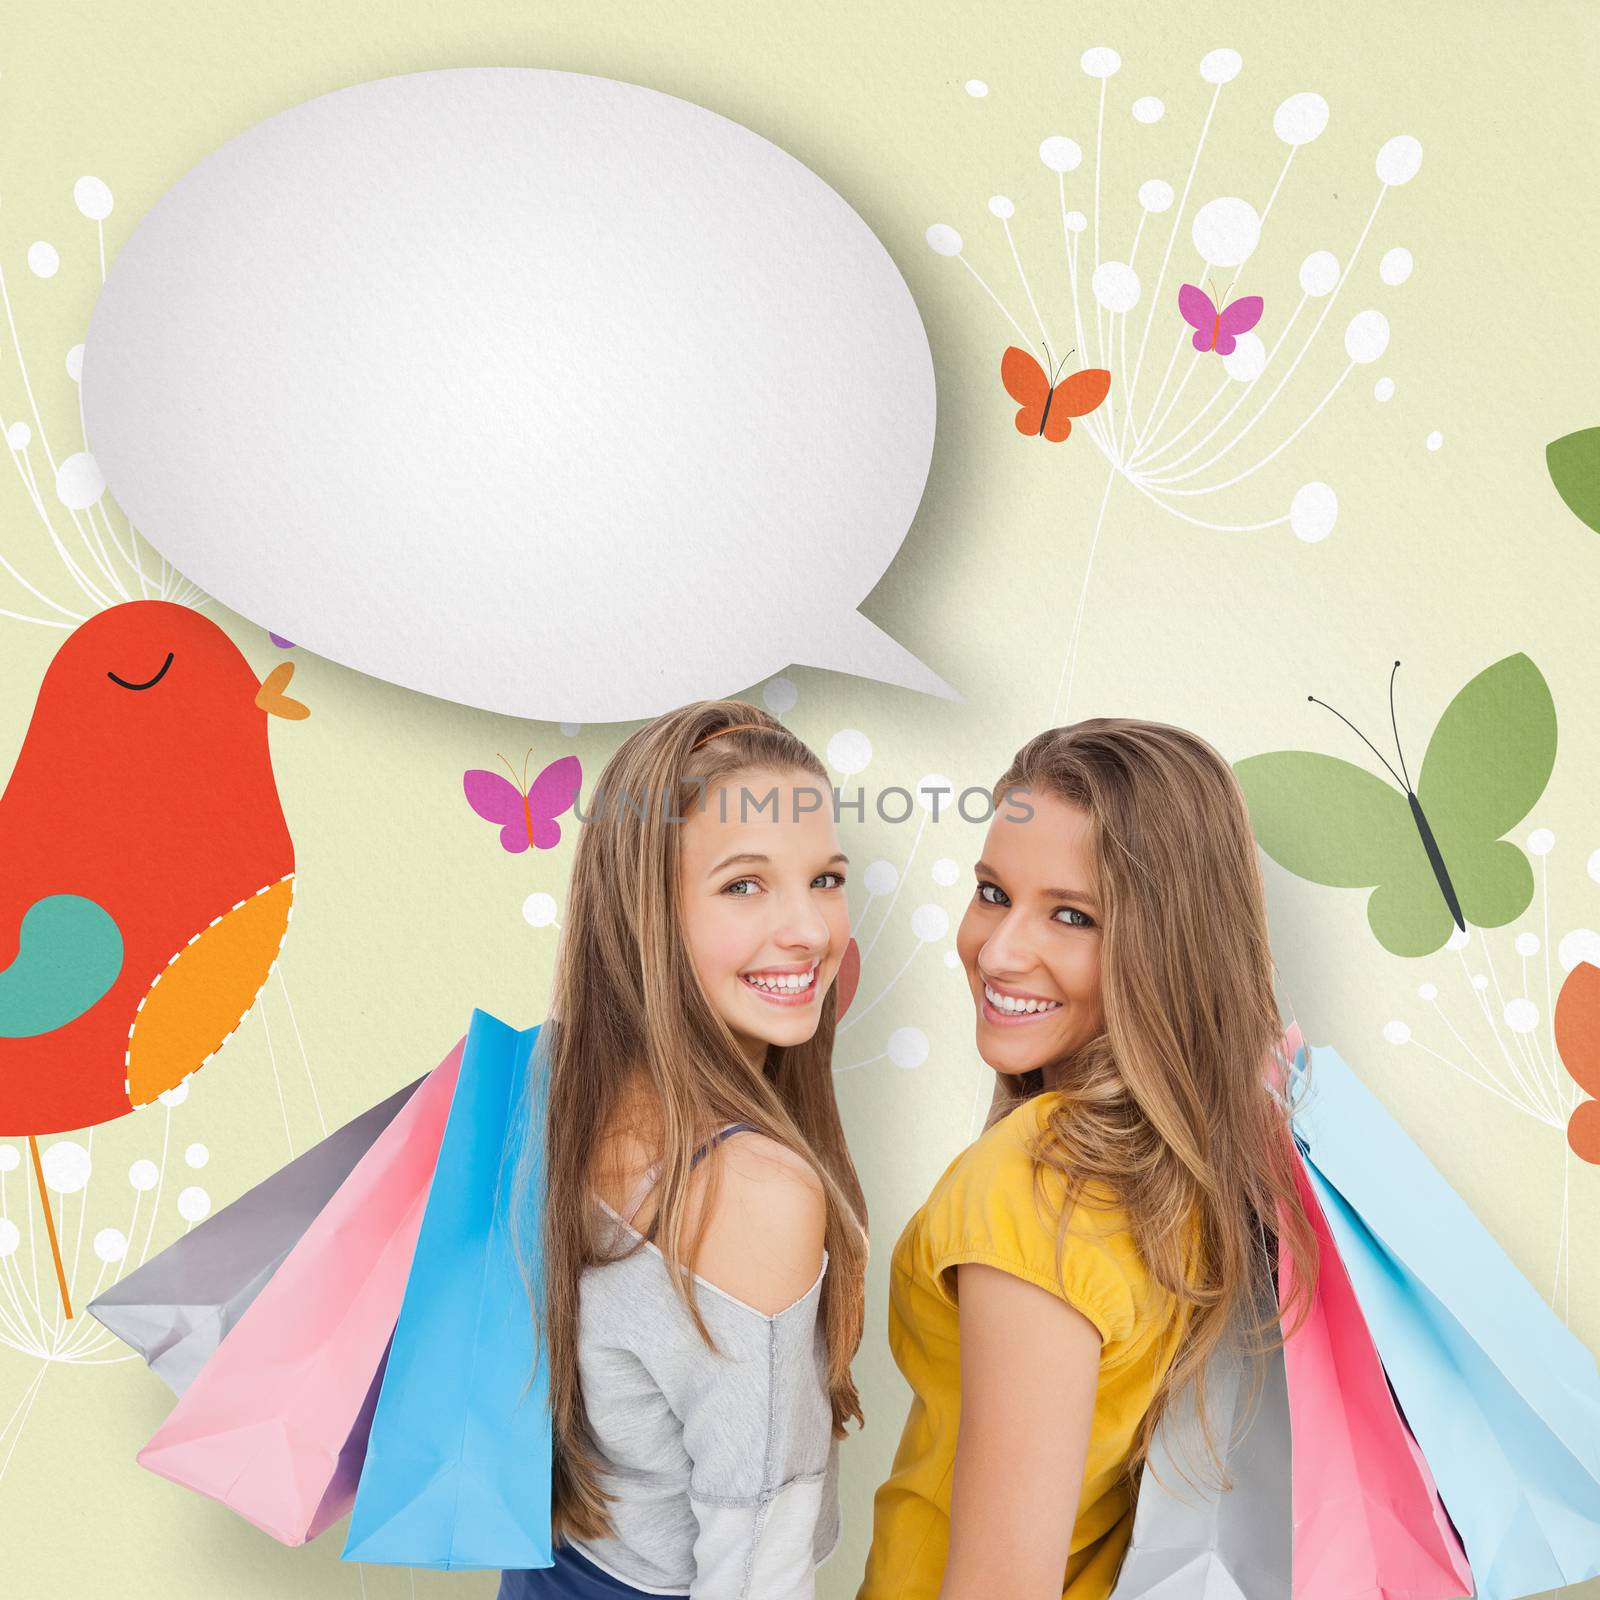 Composite image of two young women with shopping bags with speech bubble by Wavebreakmedia